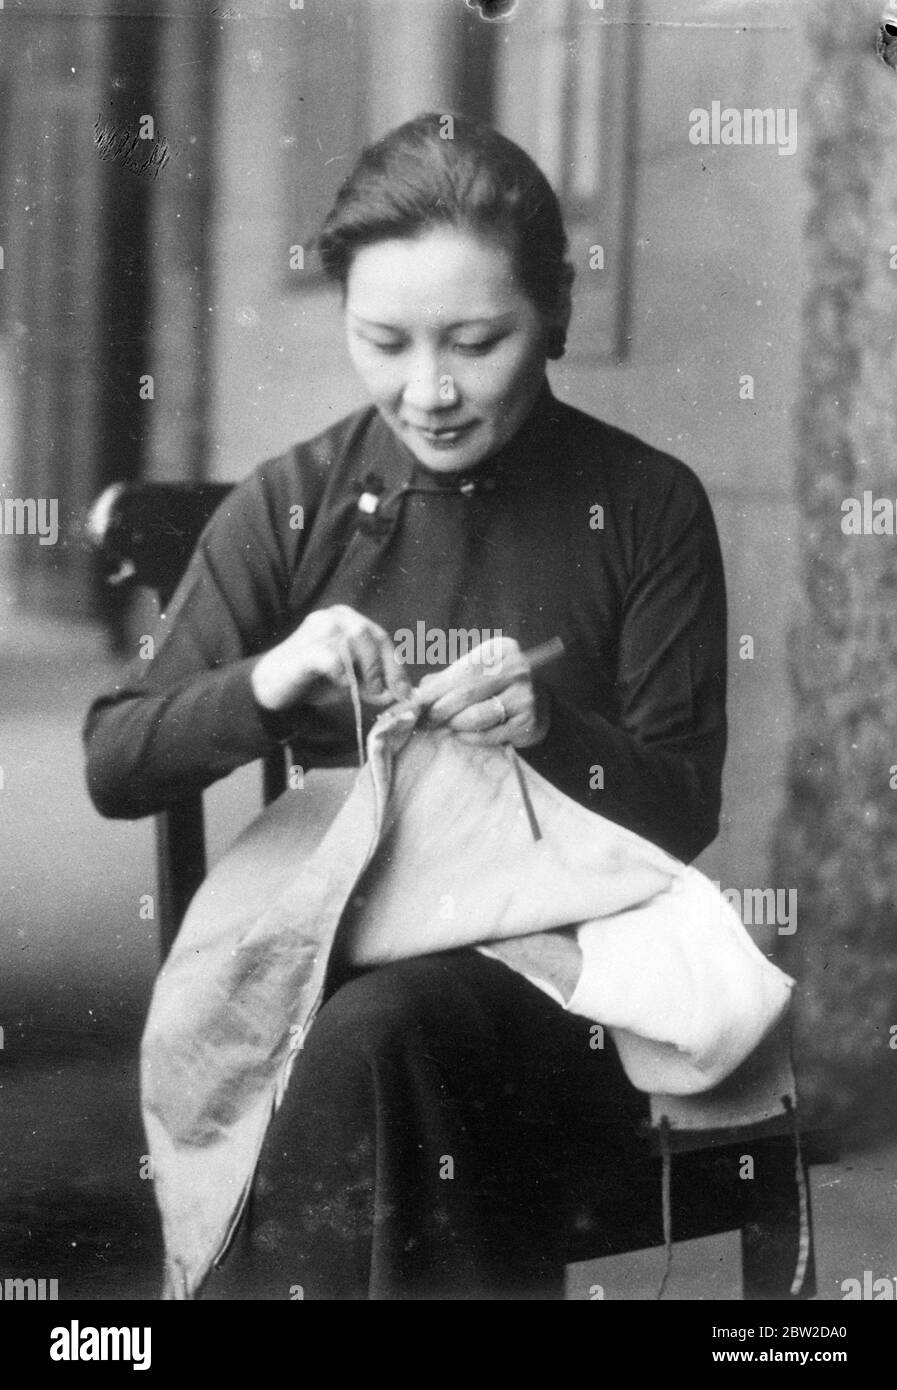 Madame Chiang Kai-shek, wife of the Chinese Generalissimo and First Lady of China, has been taking time off from affairs of state, in which she is one of her husband's most trusted advisers, to sew clothing for soldiers and refugees under the auspices of the New Life Women's Working Groups, which have their headquarters in the Yokohama Special Bank building in Hankow, the provisional Chinese headquarters. Photo shows: Madame Chiang sewing a soldiers padded vest. Stock Photo